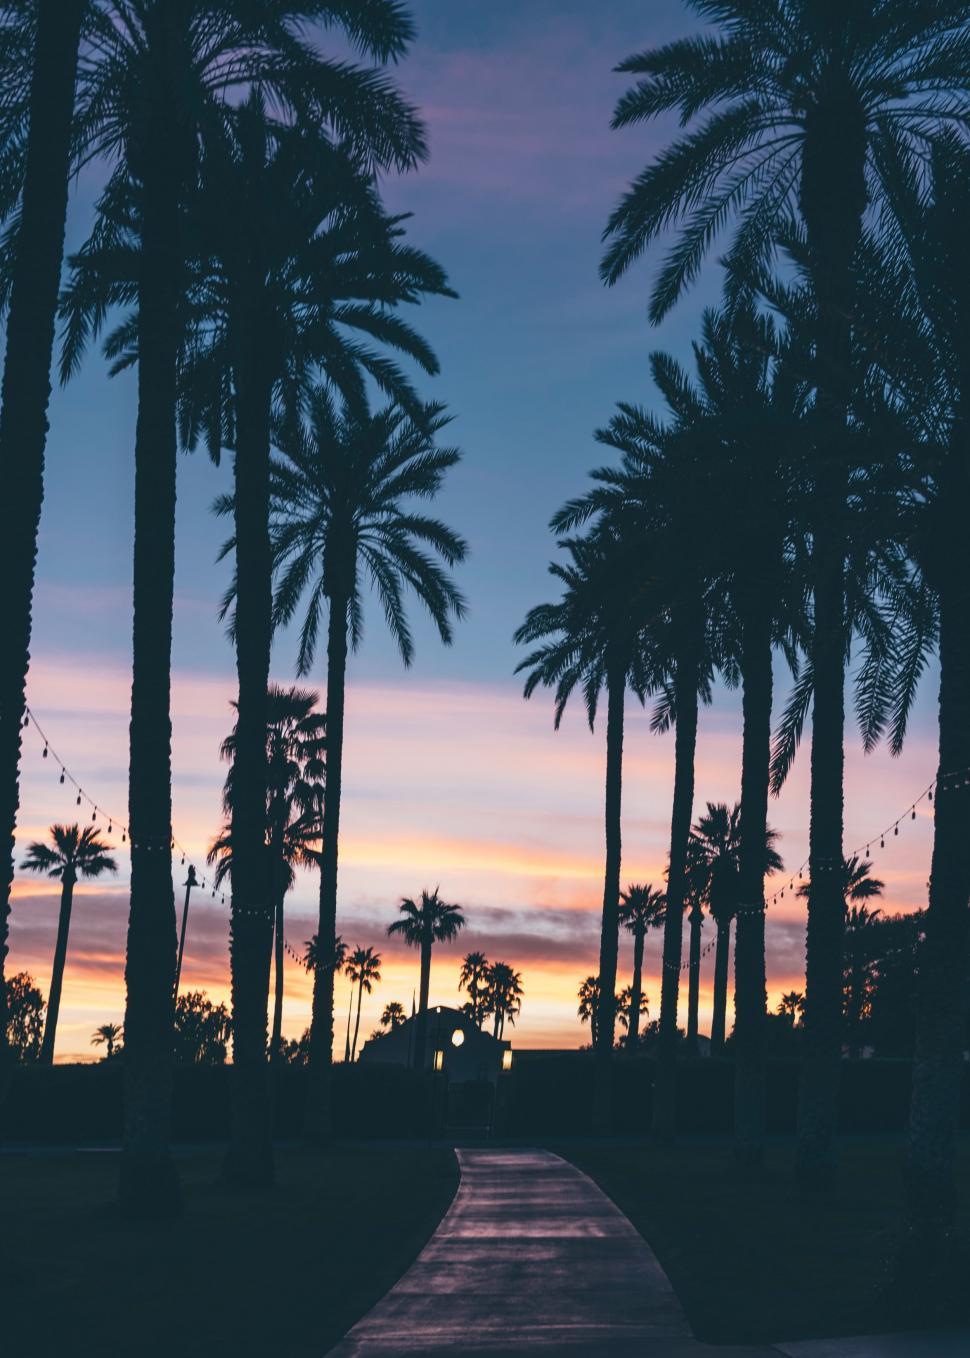 Free Image of Palm Trees Silhouetted Against Colorful Sunset 